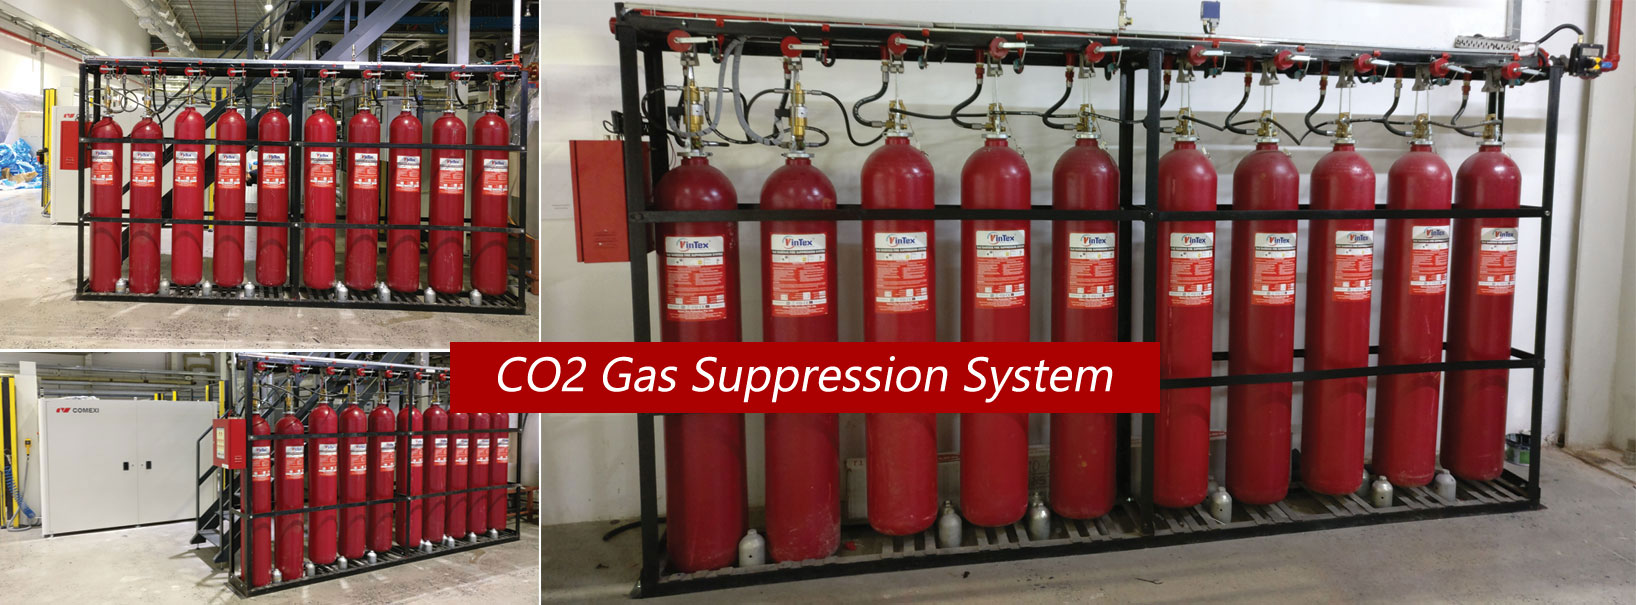 CO2 Gas Suppression System